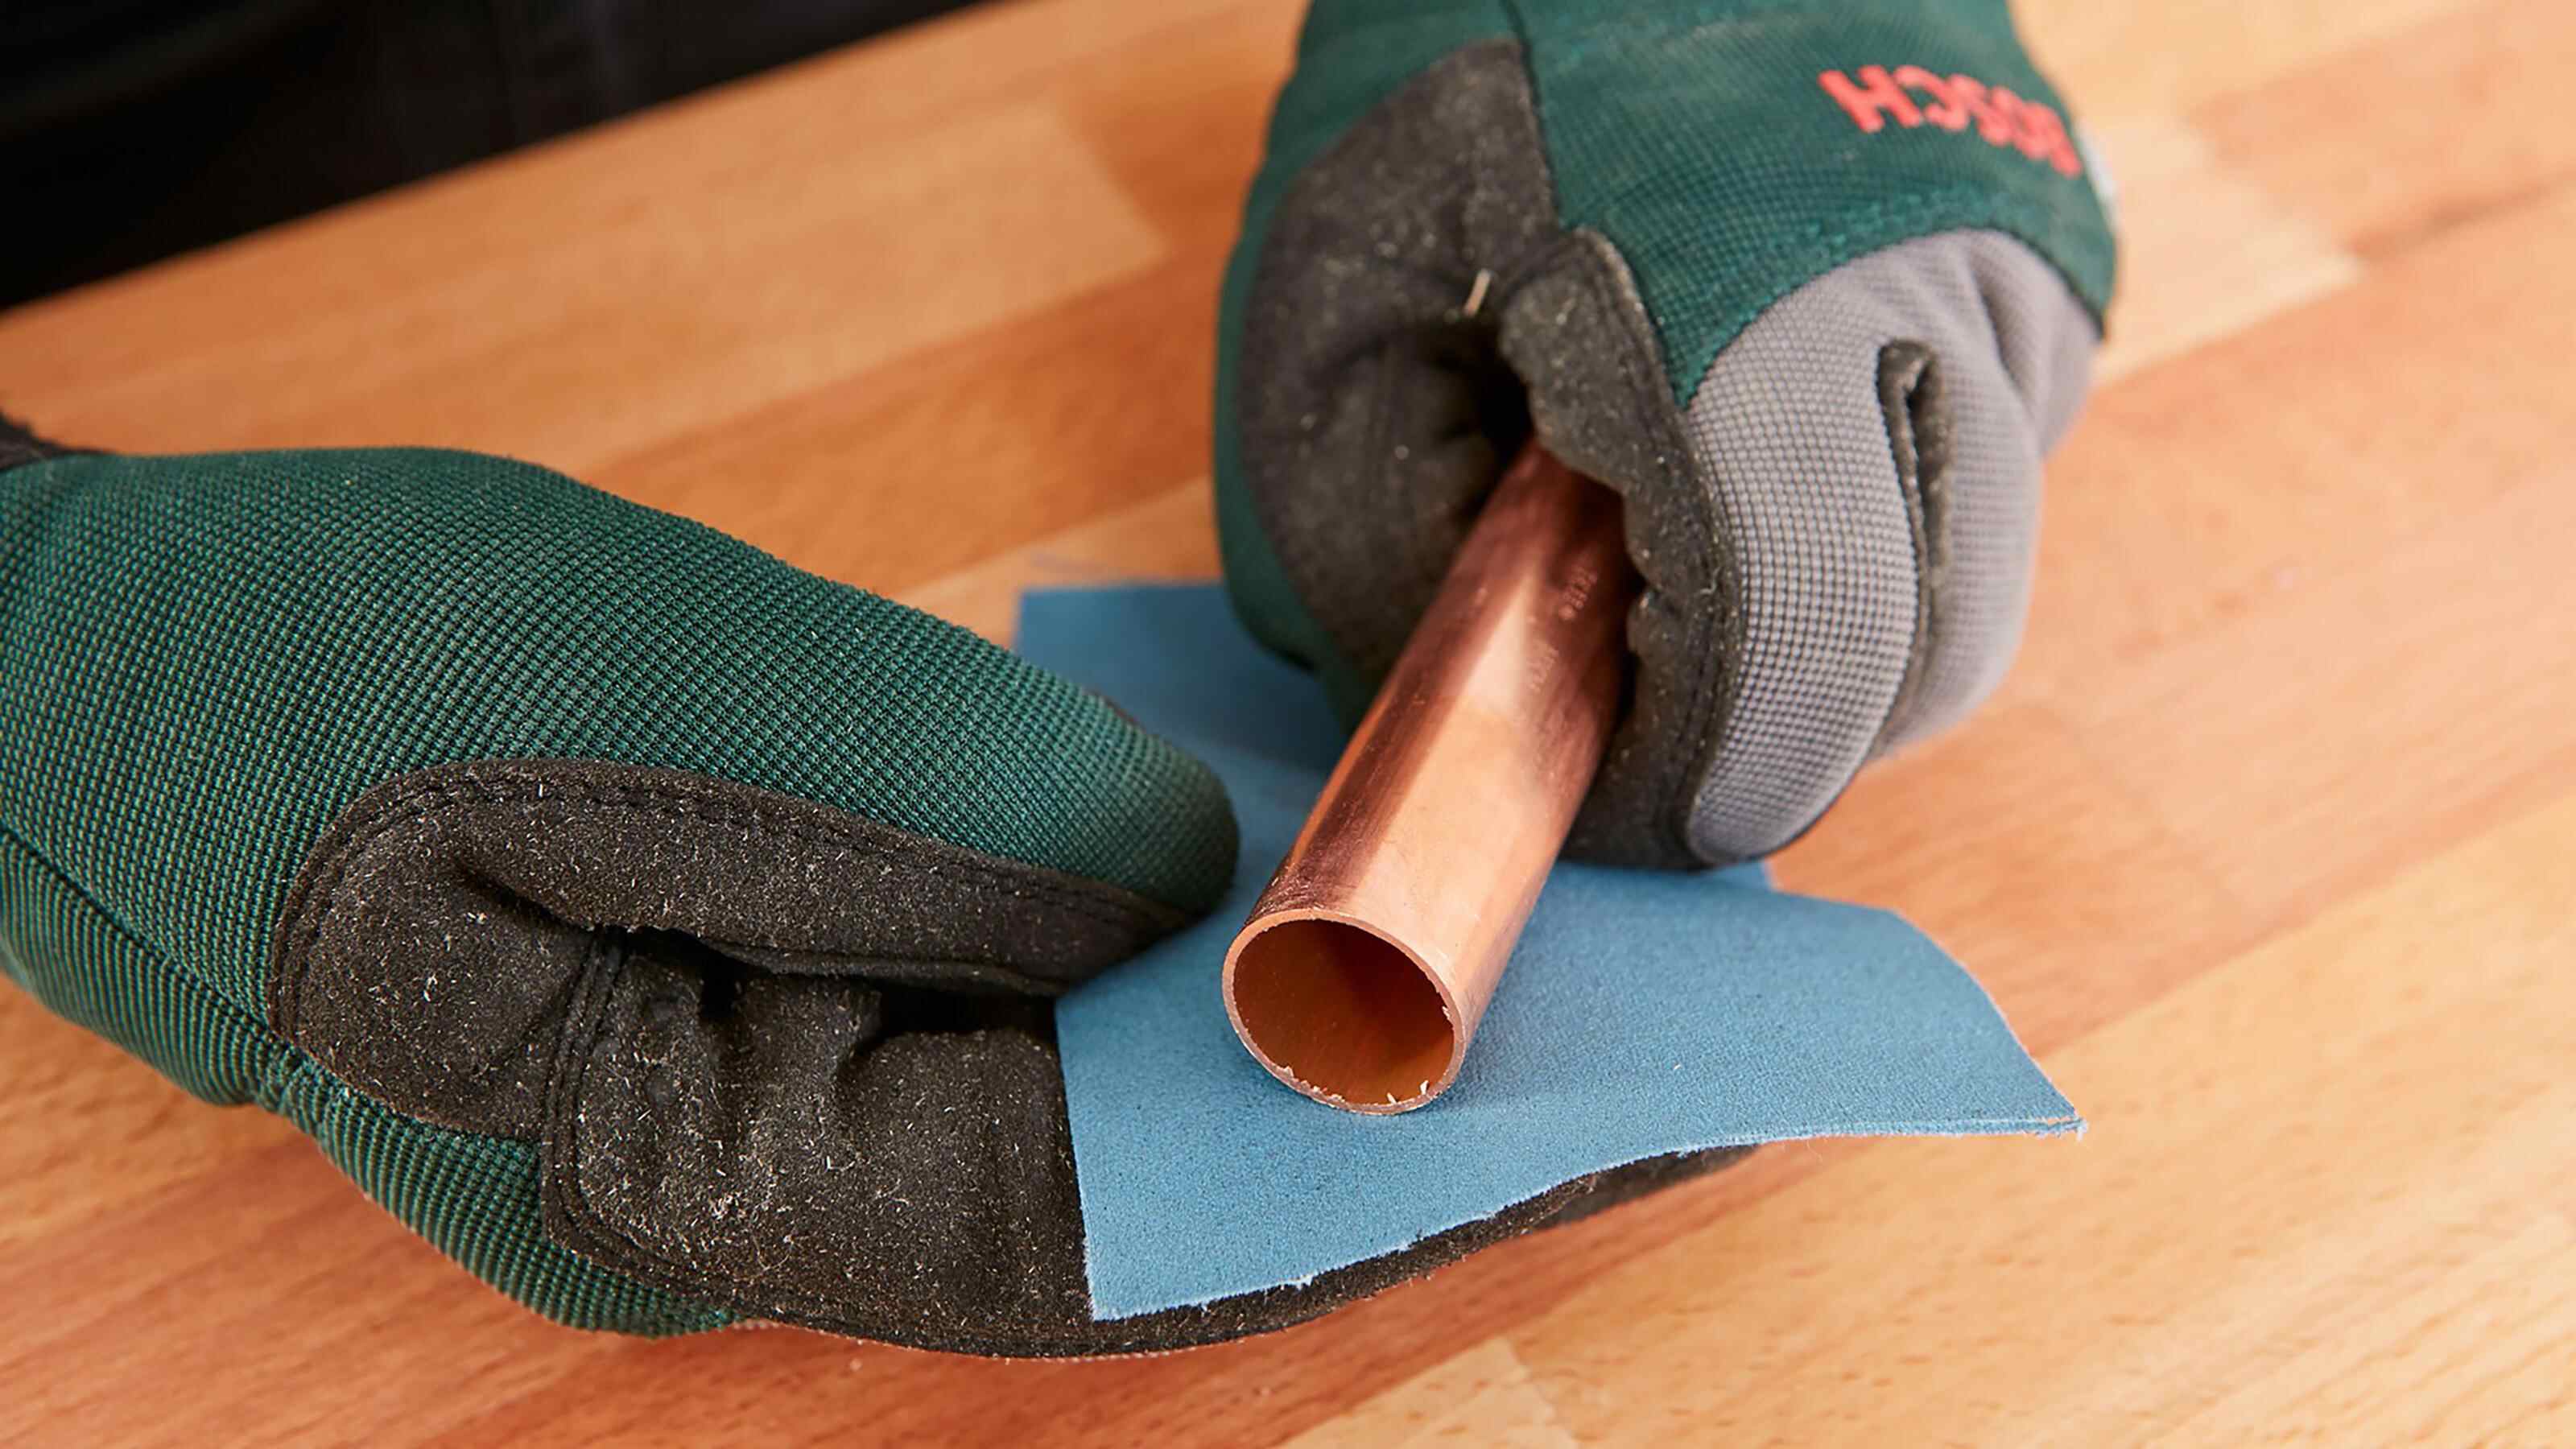 What Grit Sandpaper For Copper Pipe